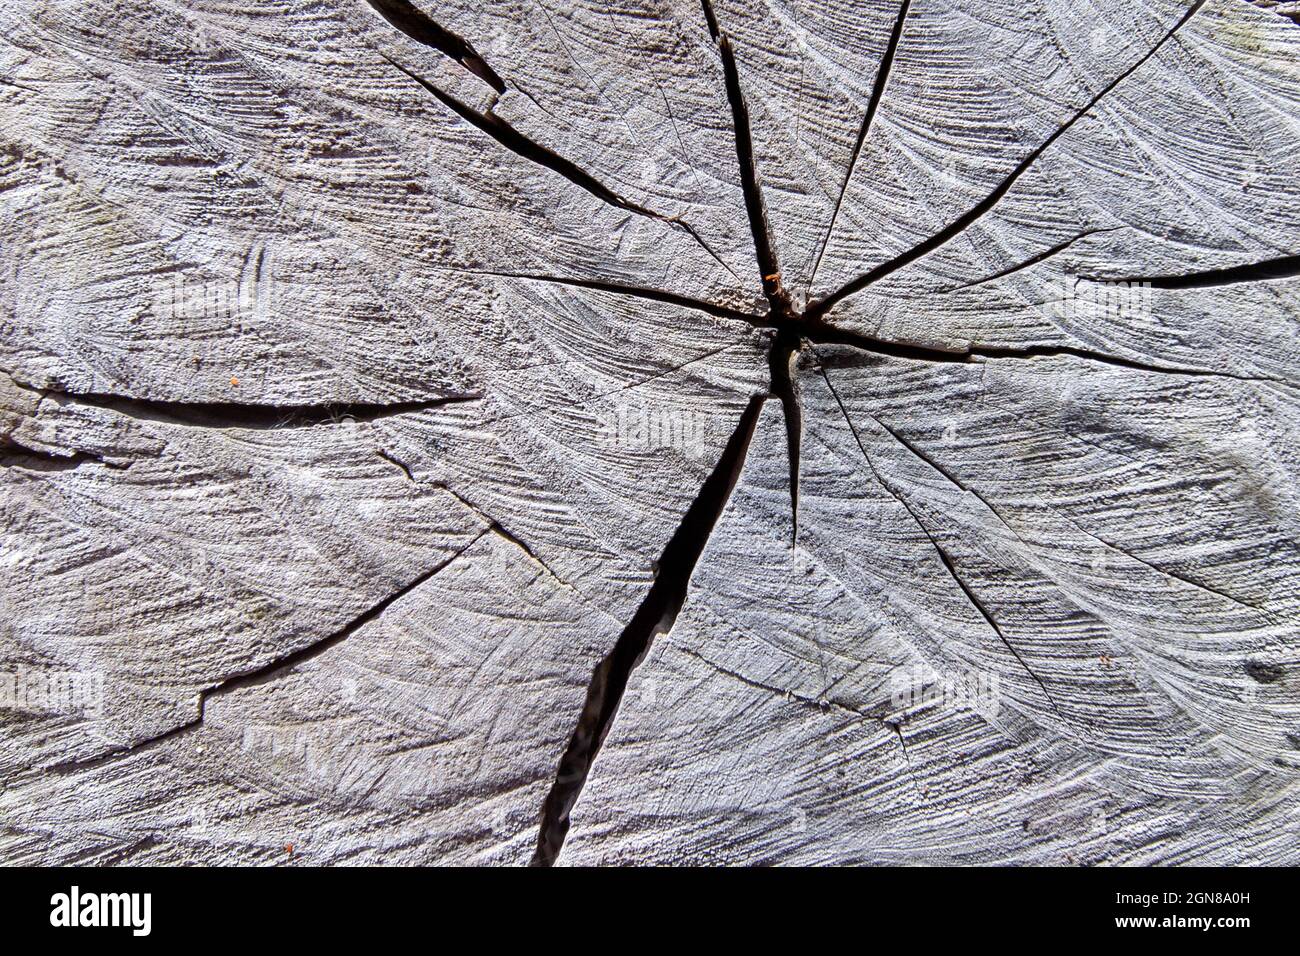 Full frame of a tree stump. Wood pattern and texture on a dead tree Stock Photo